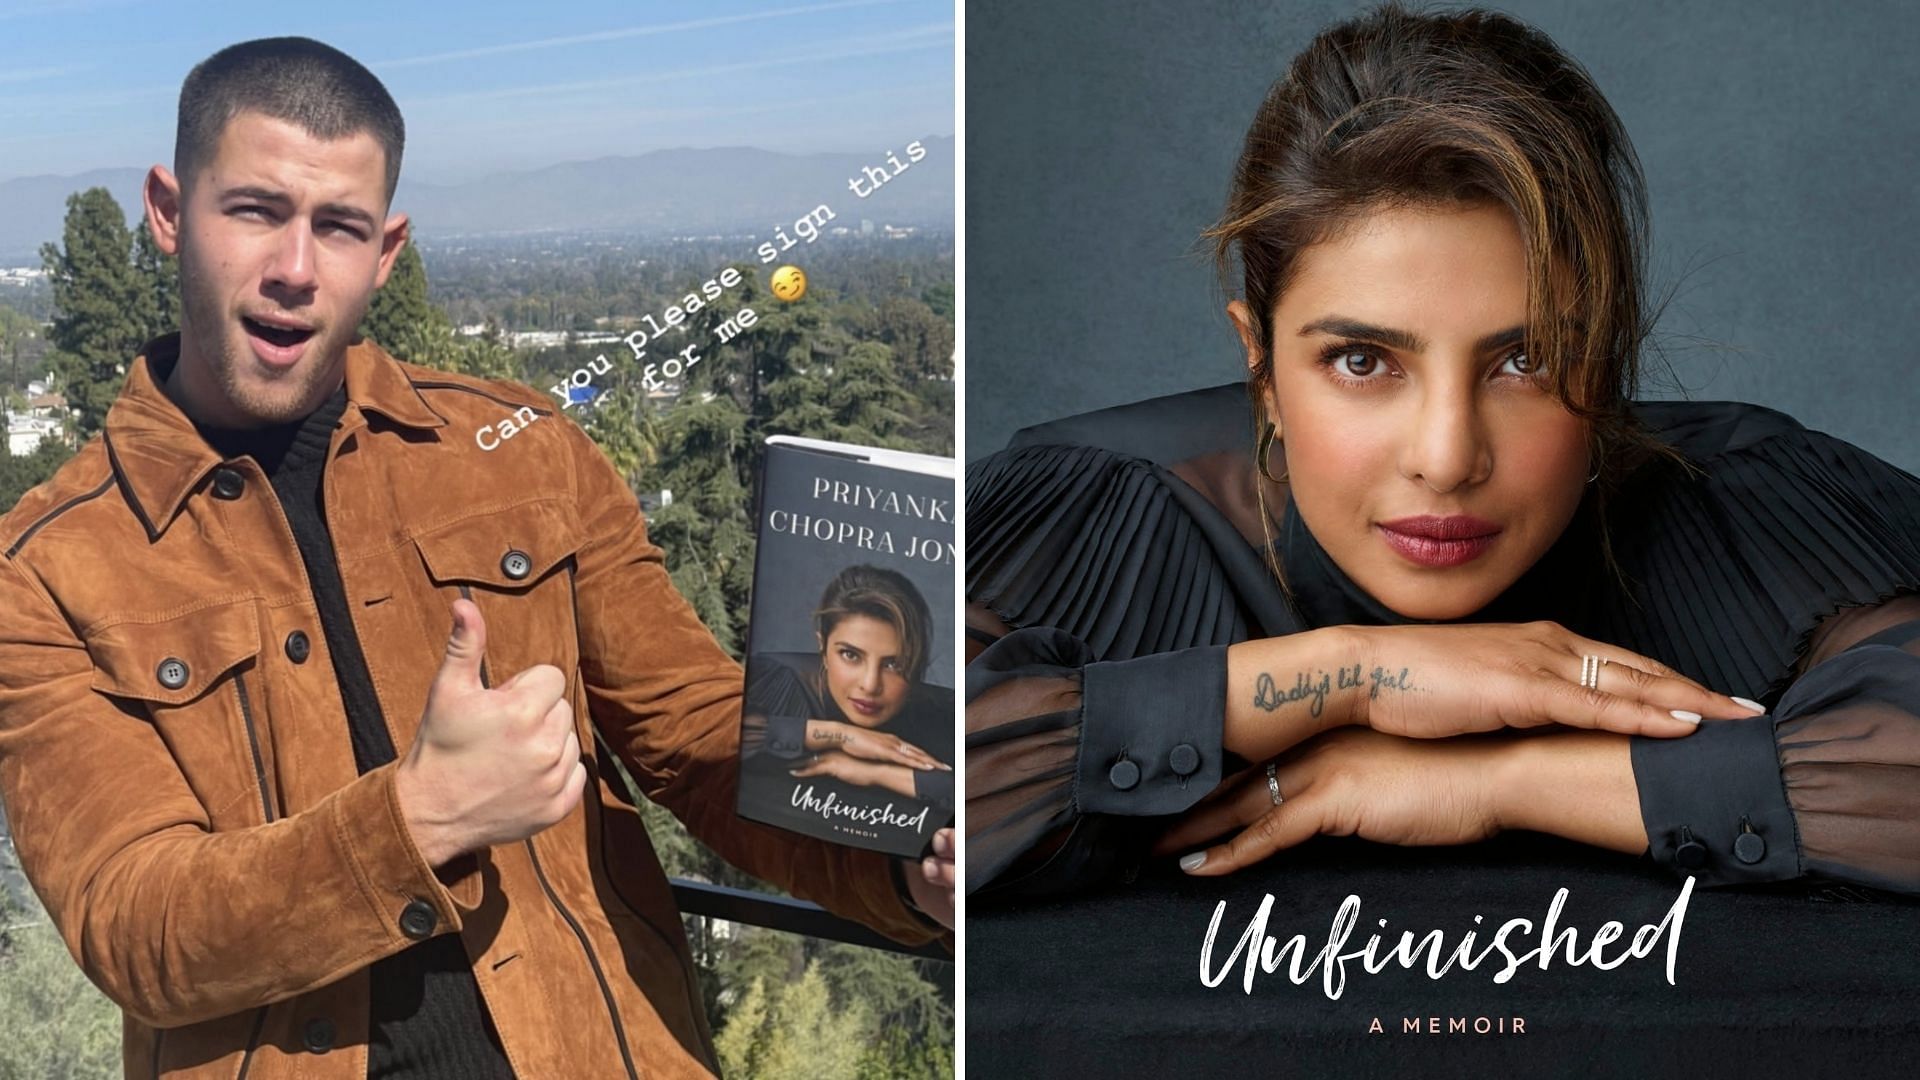  <p>Nick Jonas takes to Instagram to ask Priyanka Chopra for an autographed copy of her book “Unfinished”.</p>